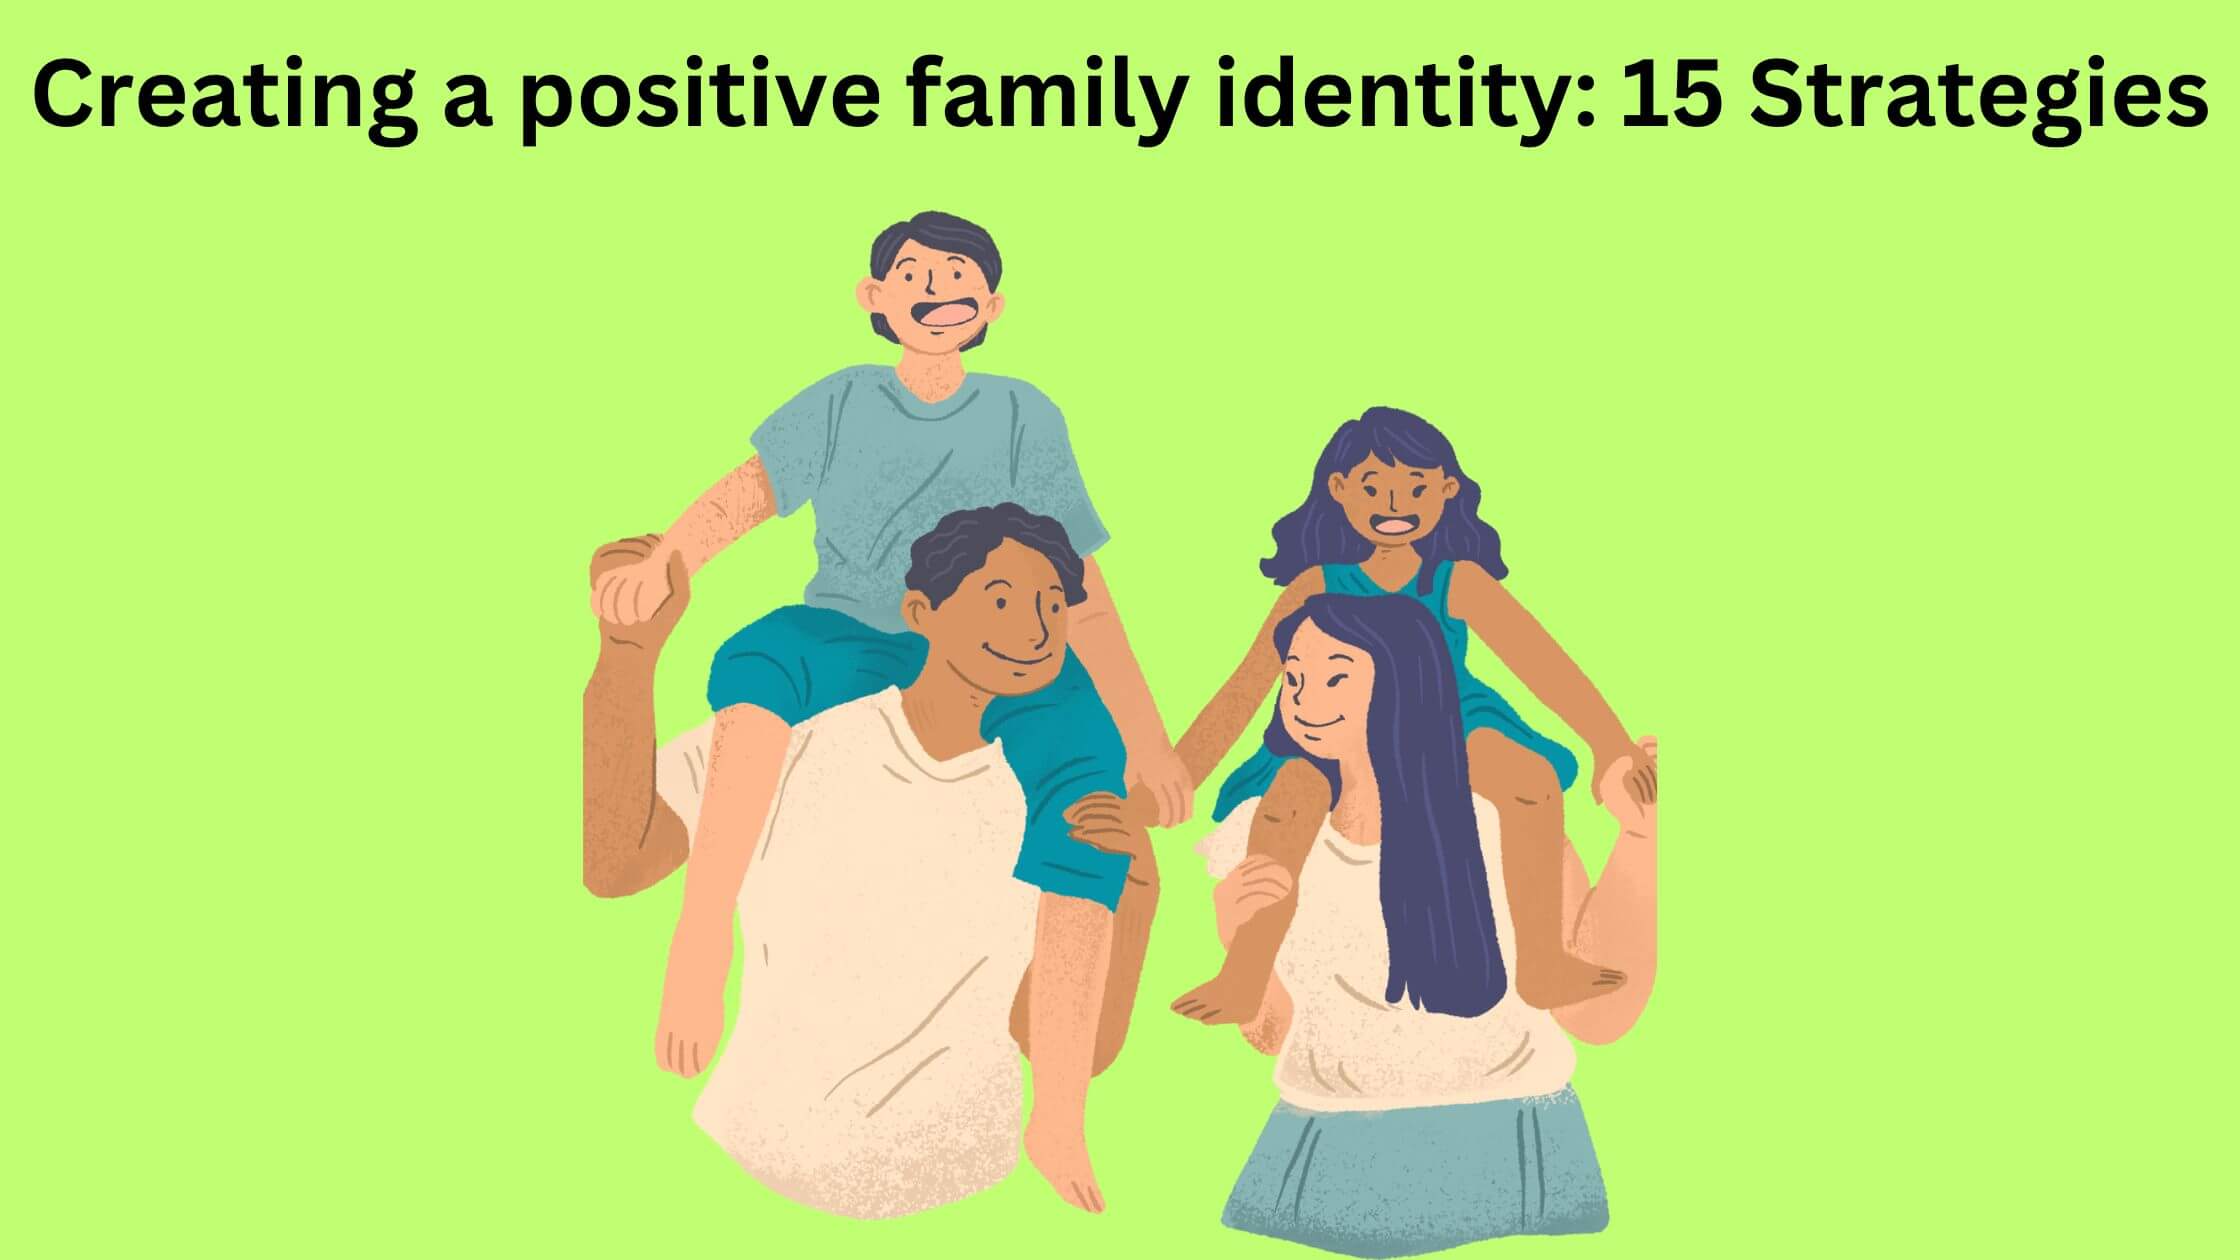 How to create a positive family identity